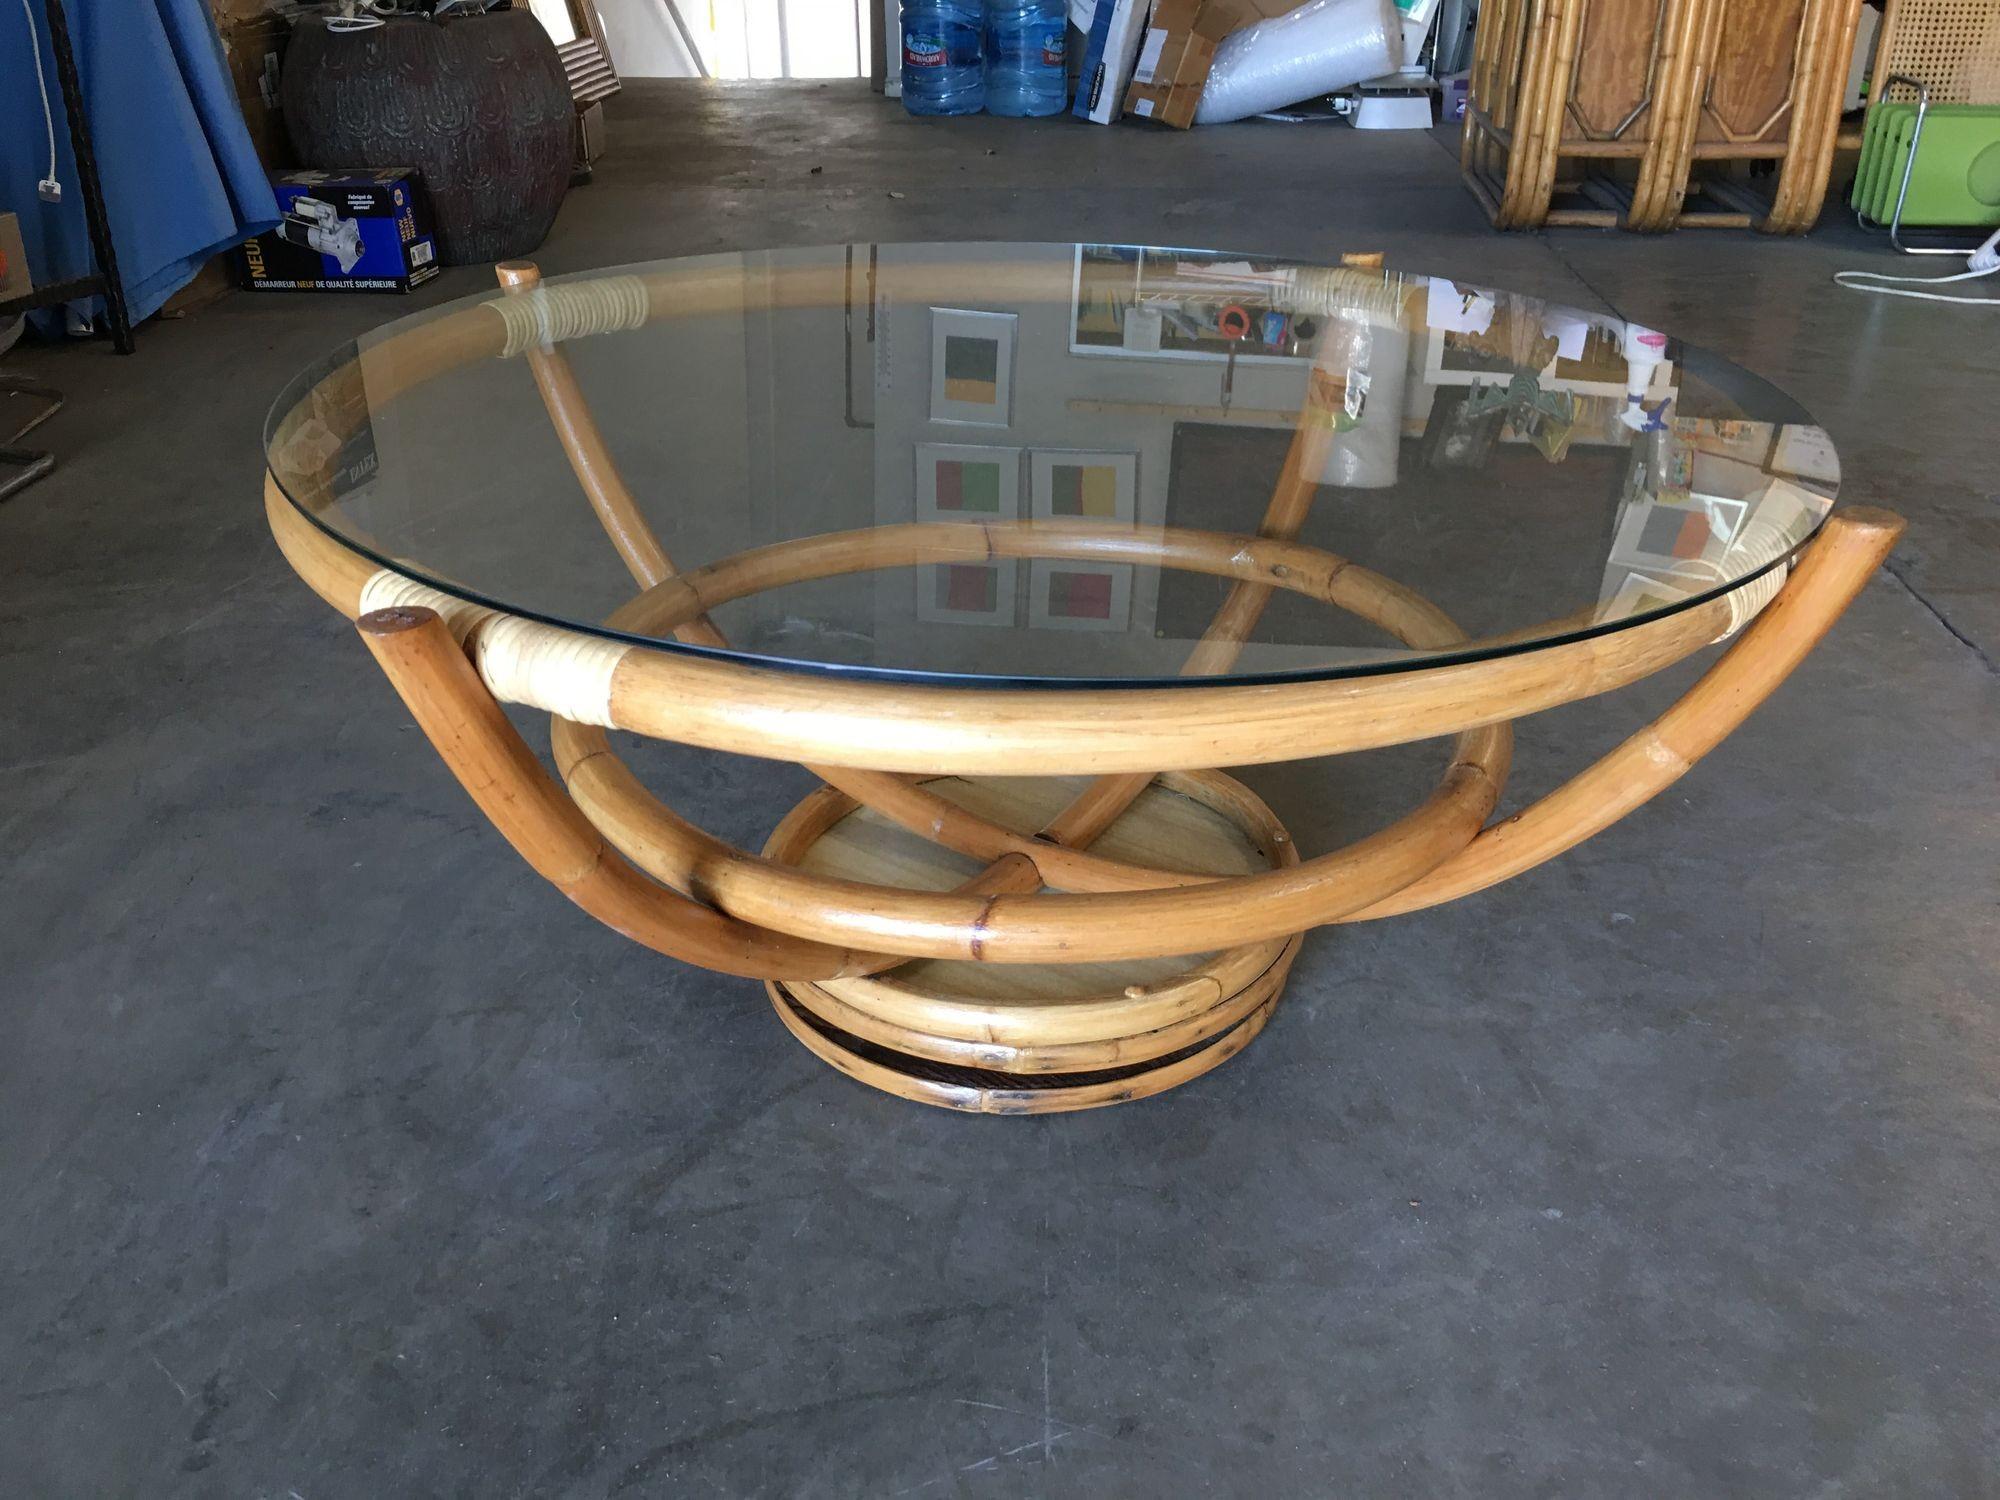 Restored Four Pole Rattan Coffee Table with Floating Glass Top In Excellent Condition For Sale In Van Nuys, CA